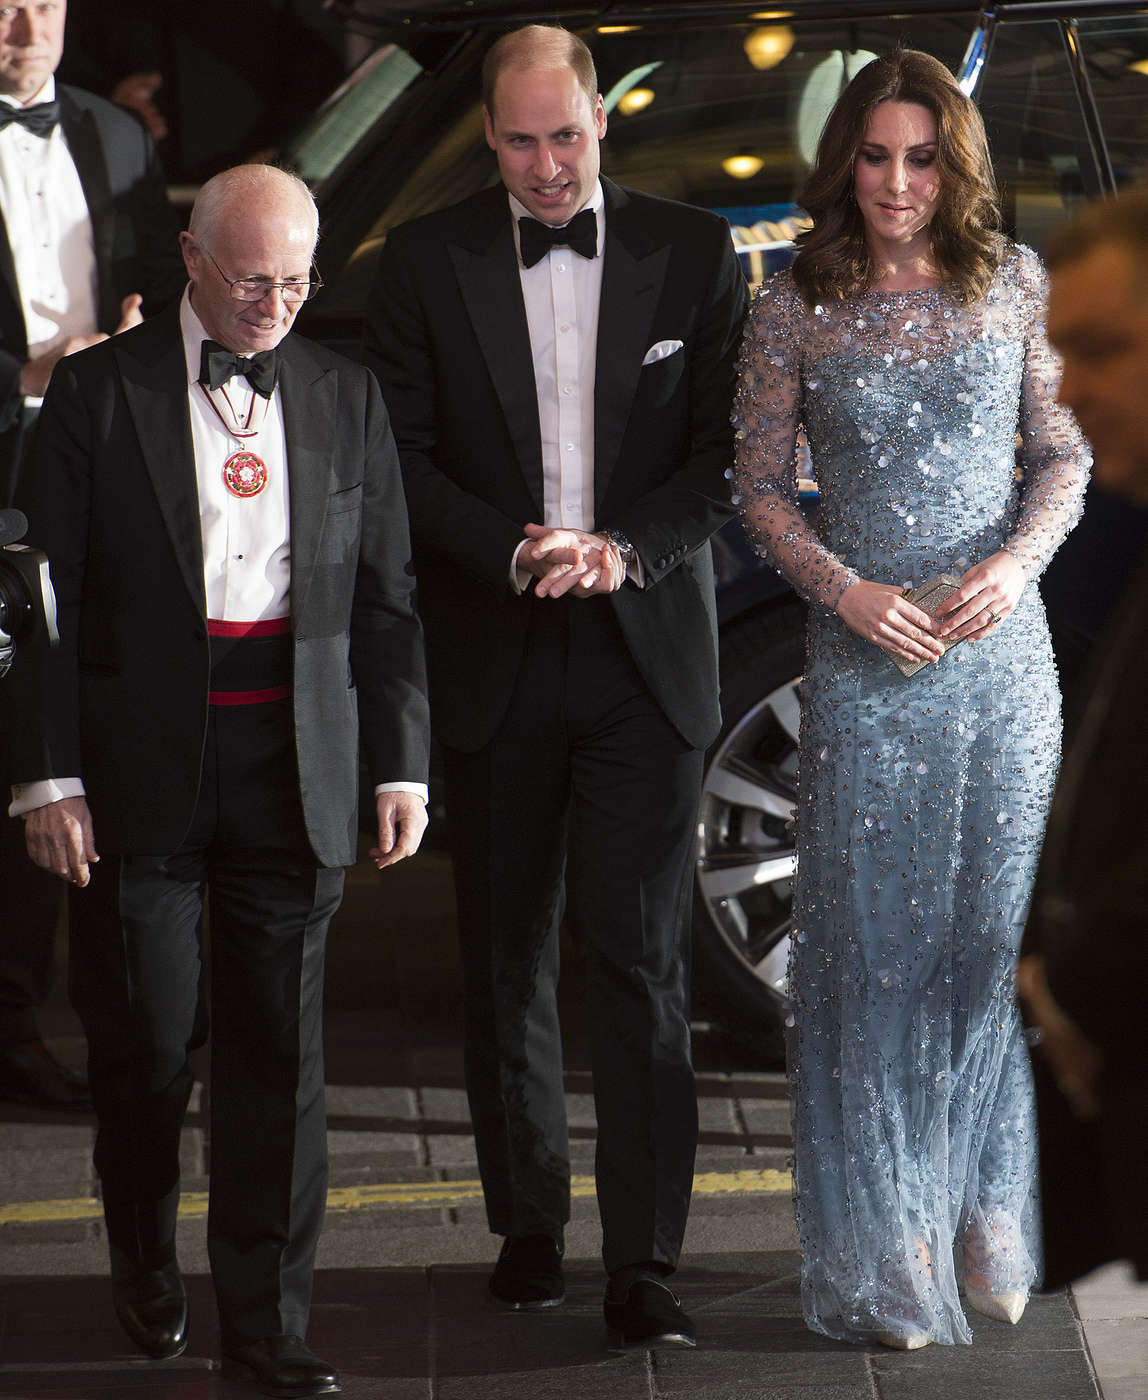 The Duke and Duchess of Cambridge attend the Royal Variety Performance at the Palladium Theatre, London